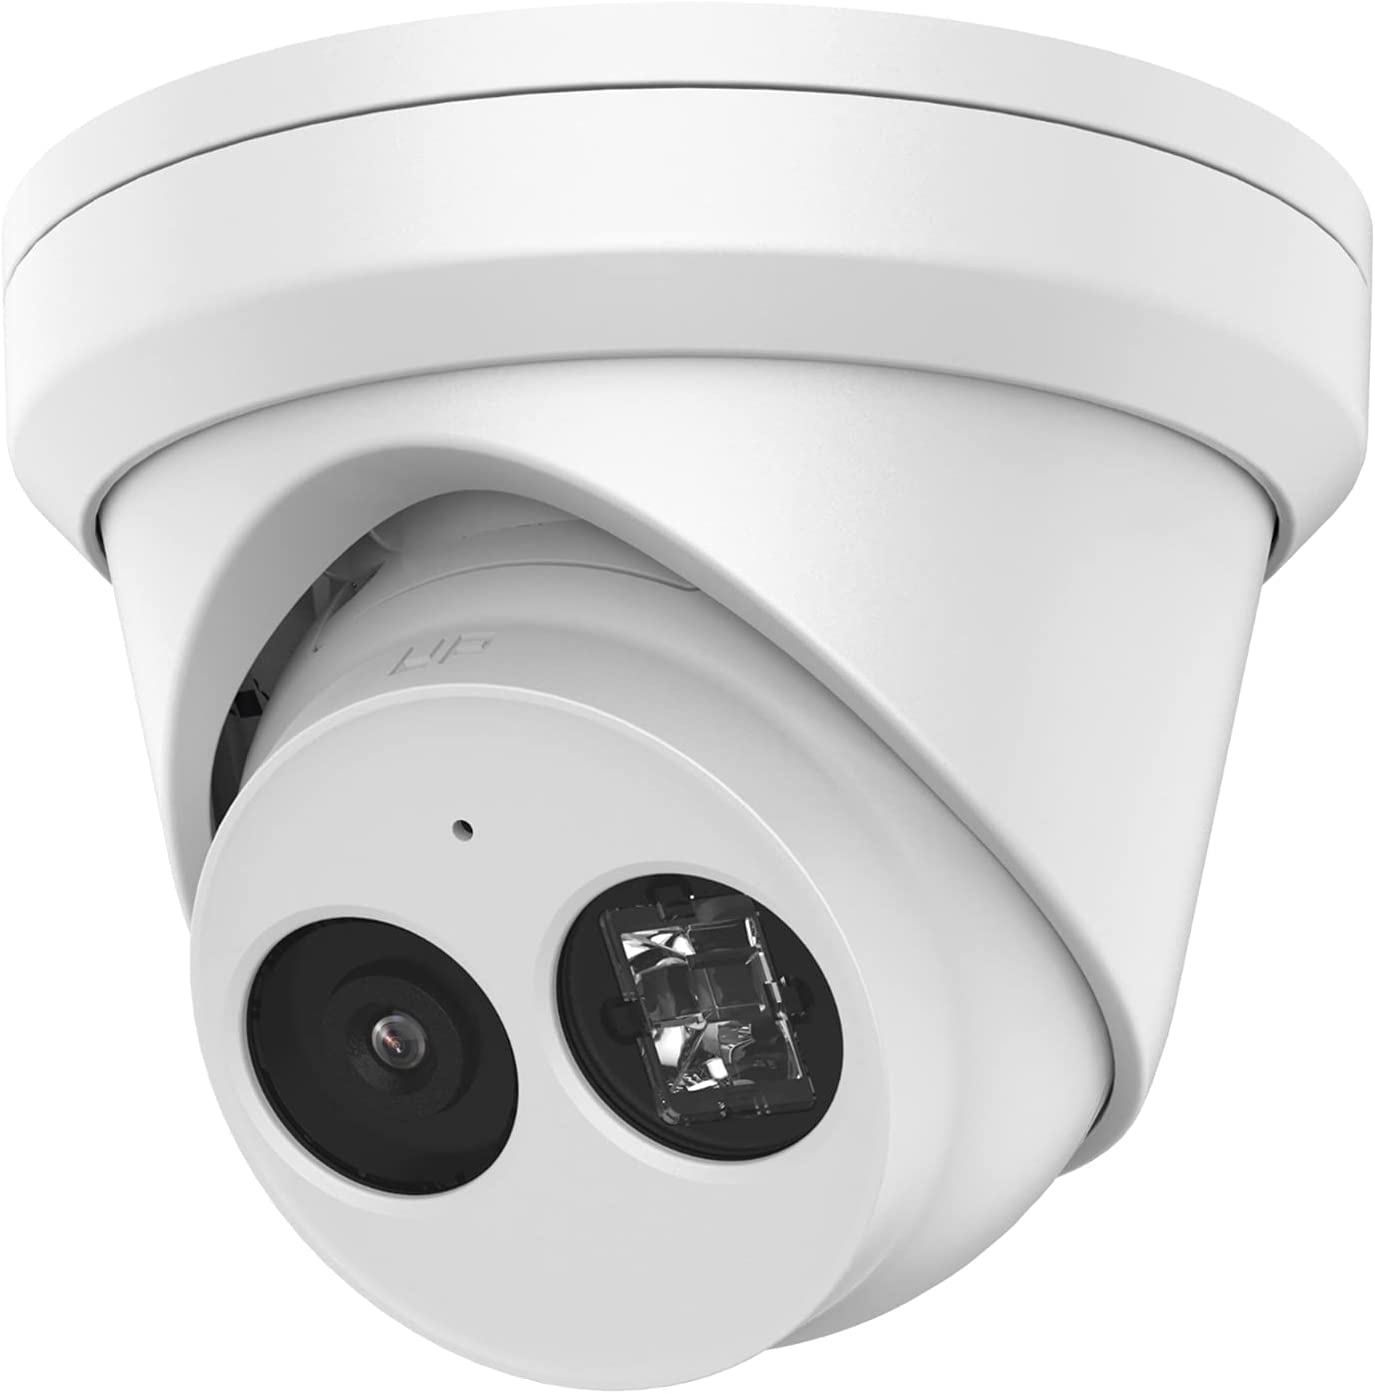 DS-2CD2343G2-IU | Value Series AcuSense 4MP Turret IP Camera with Built-In Microphone, 2.8mm Fixed Lens